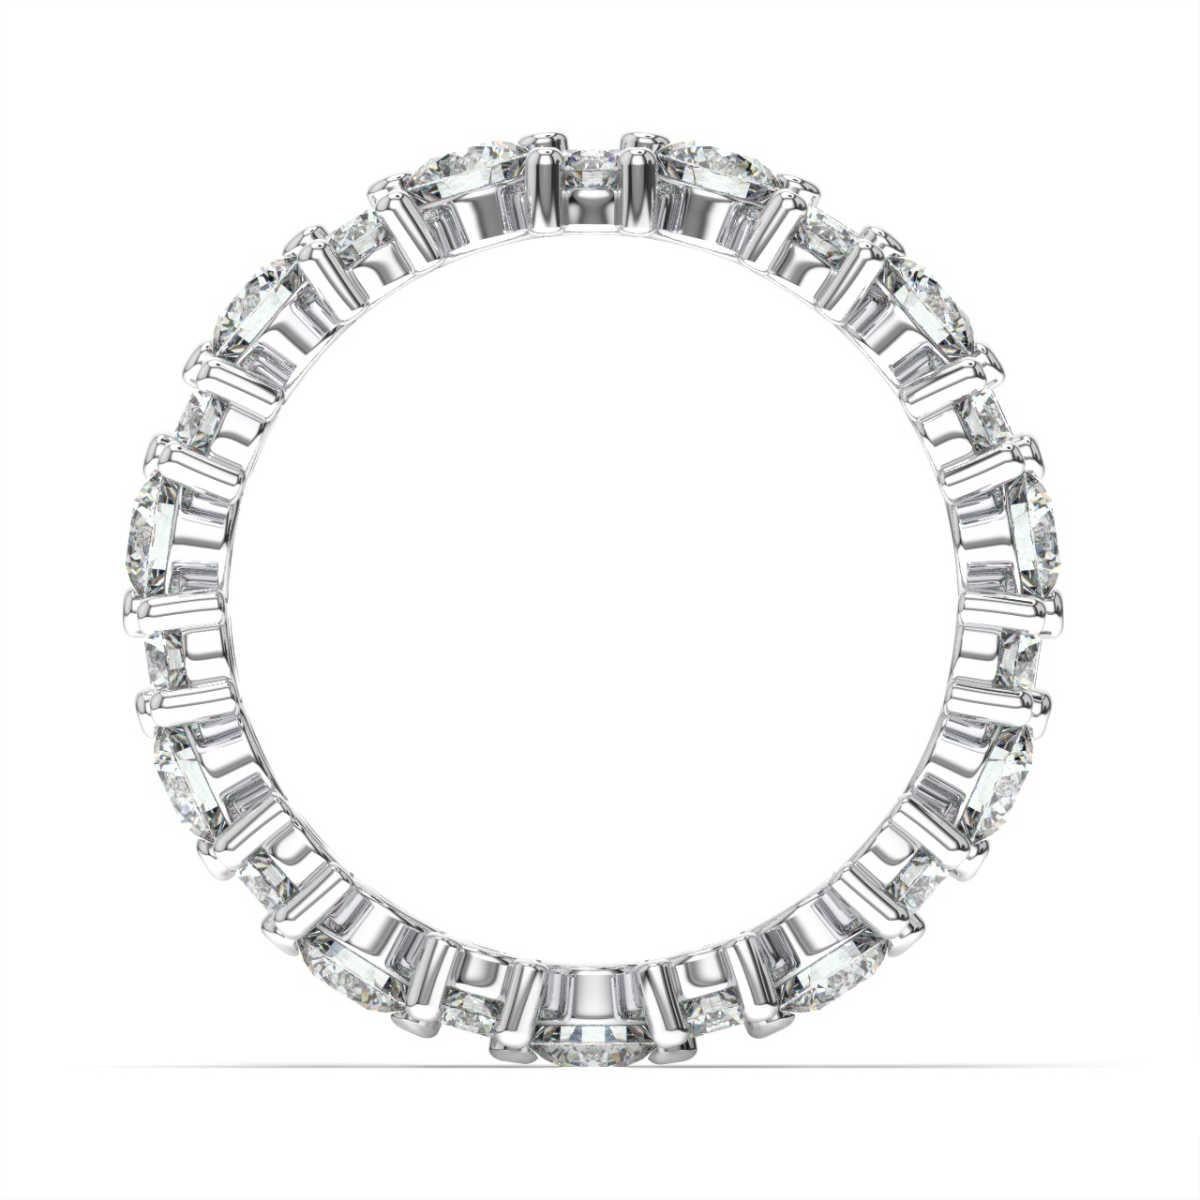 This eternity ring features a perfectly matched round brilliant diamonds set in a delicate prong. Experience the difference!

Product details: 

Center Gemstone Color: WHITE
Side Gemstone Type: NATURAL DIAMOND
Side Gemstone Shape: ROUND
Metal: 14K